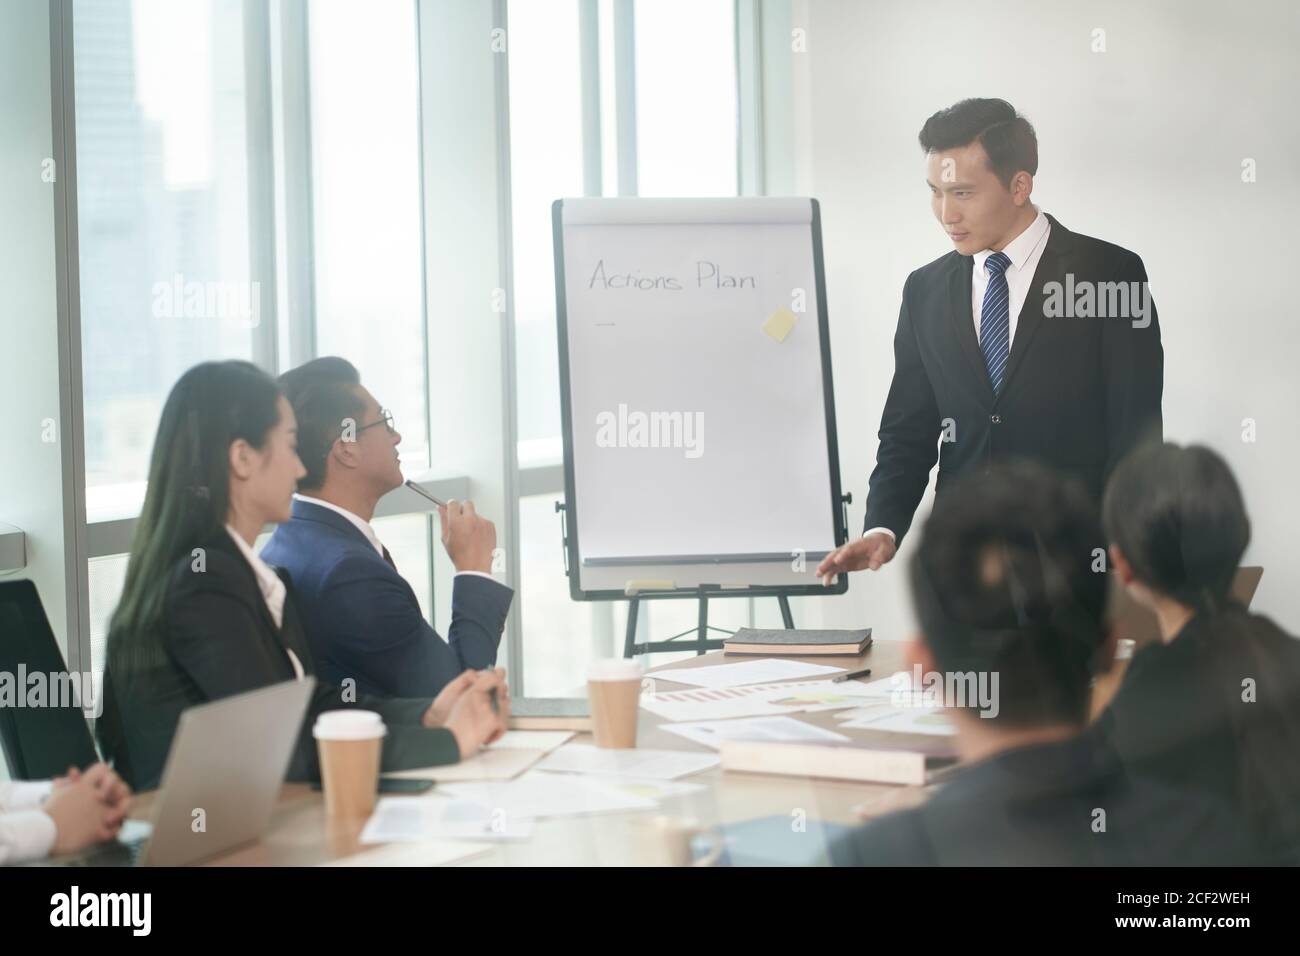 asian corporate executive presenting actions plans in business meeting in conference room Stock Photo